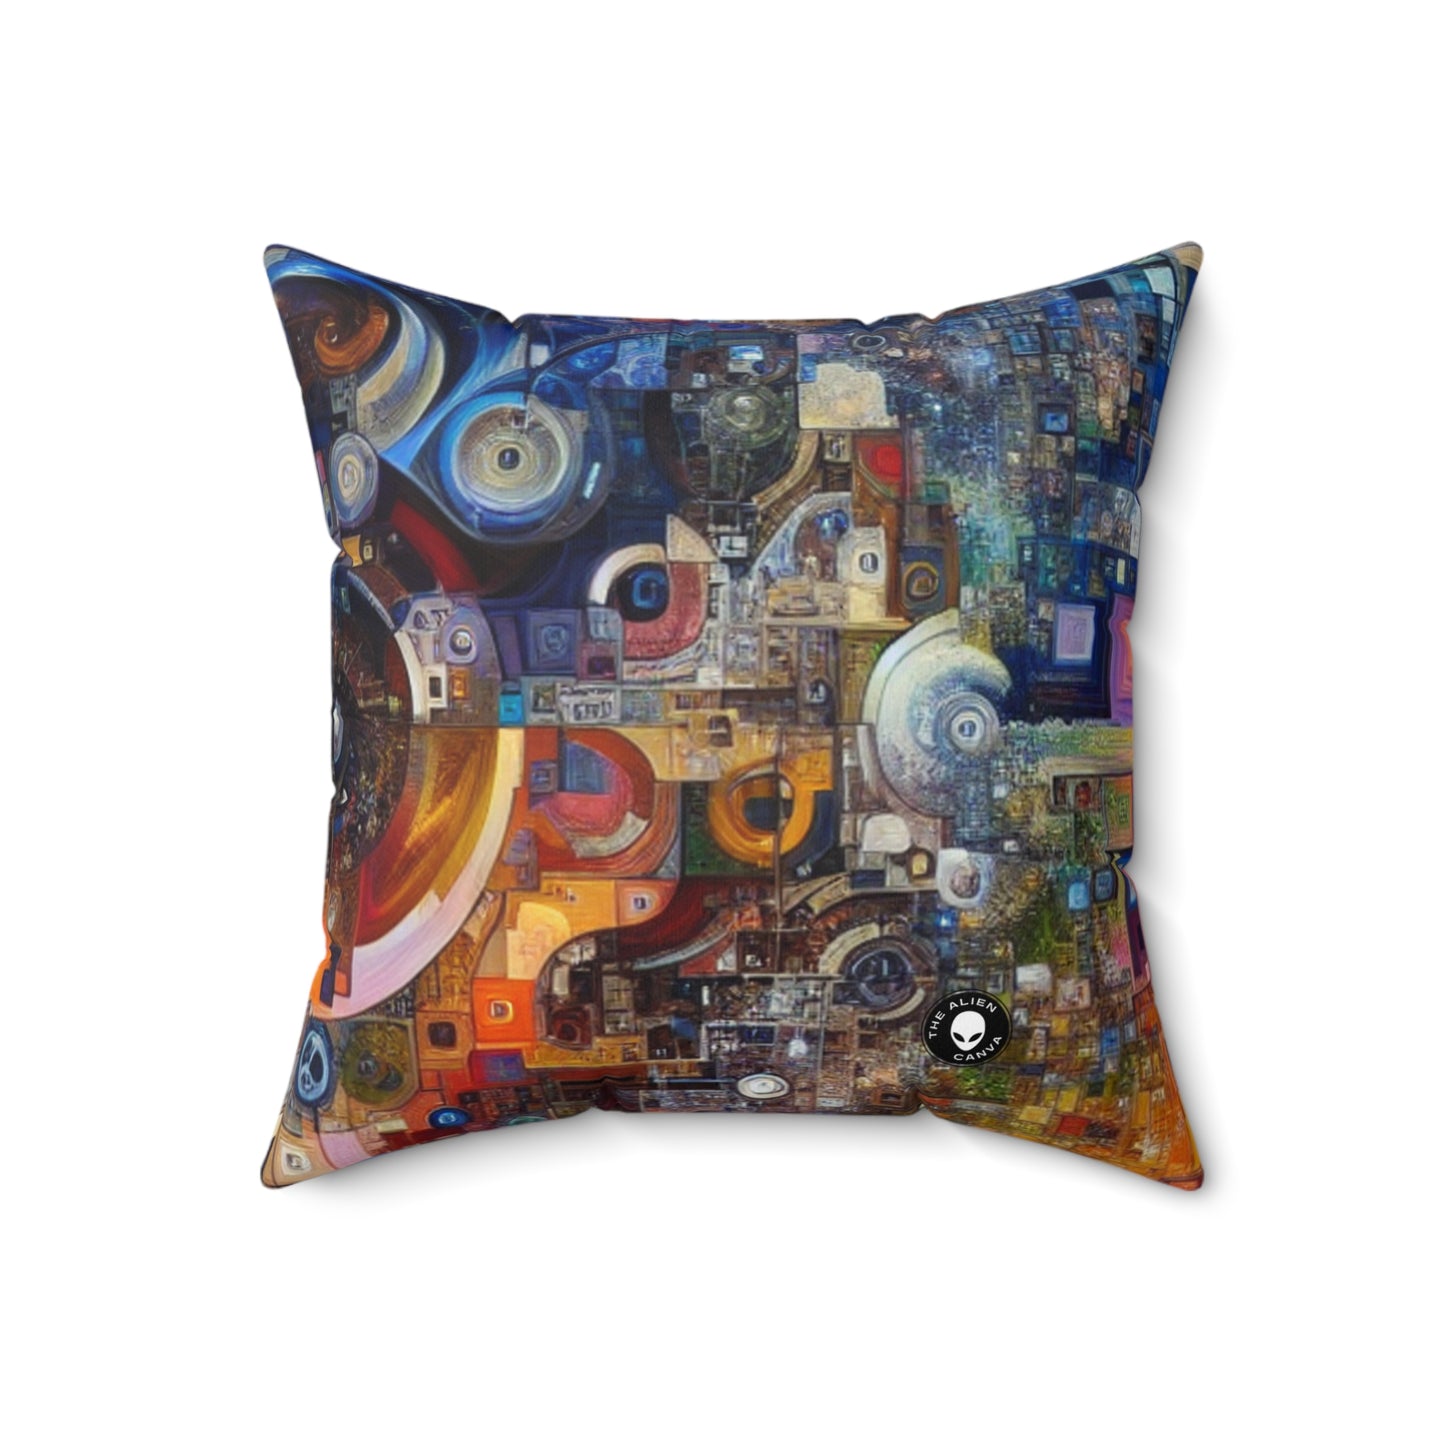 "Perception Distorted: A Postmodern Commentary on Reality"- The Alien Spun Polyester Square Pillow Postmodern Art